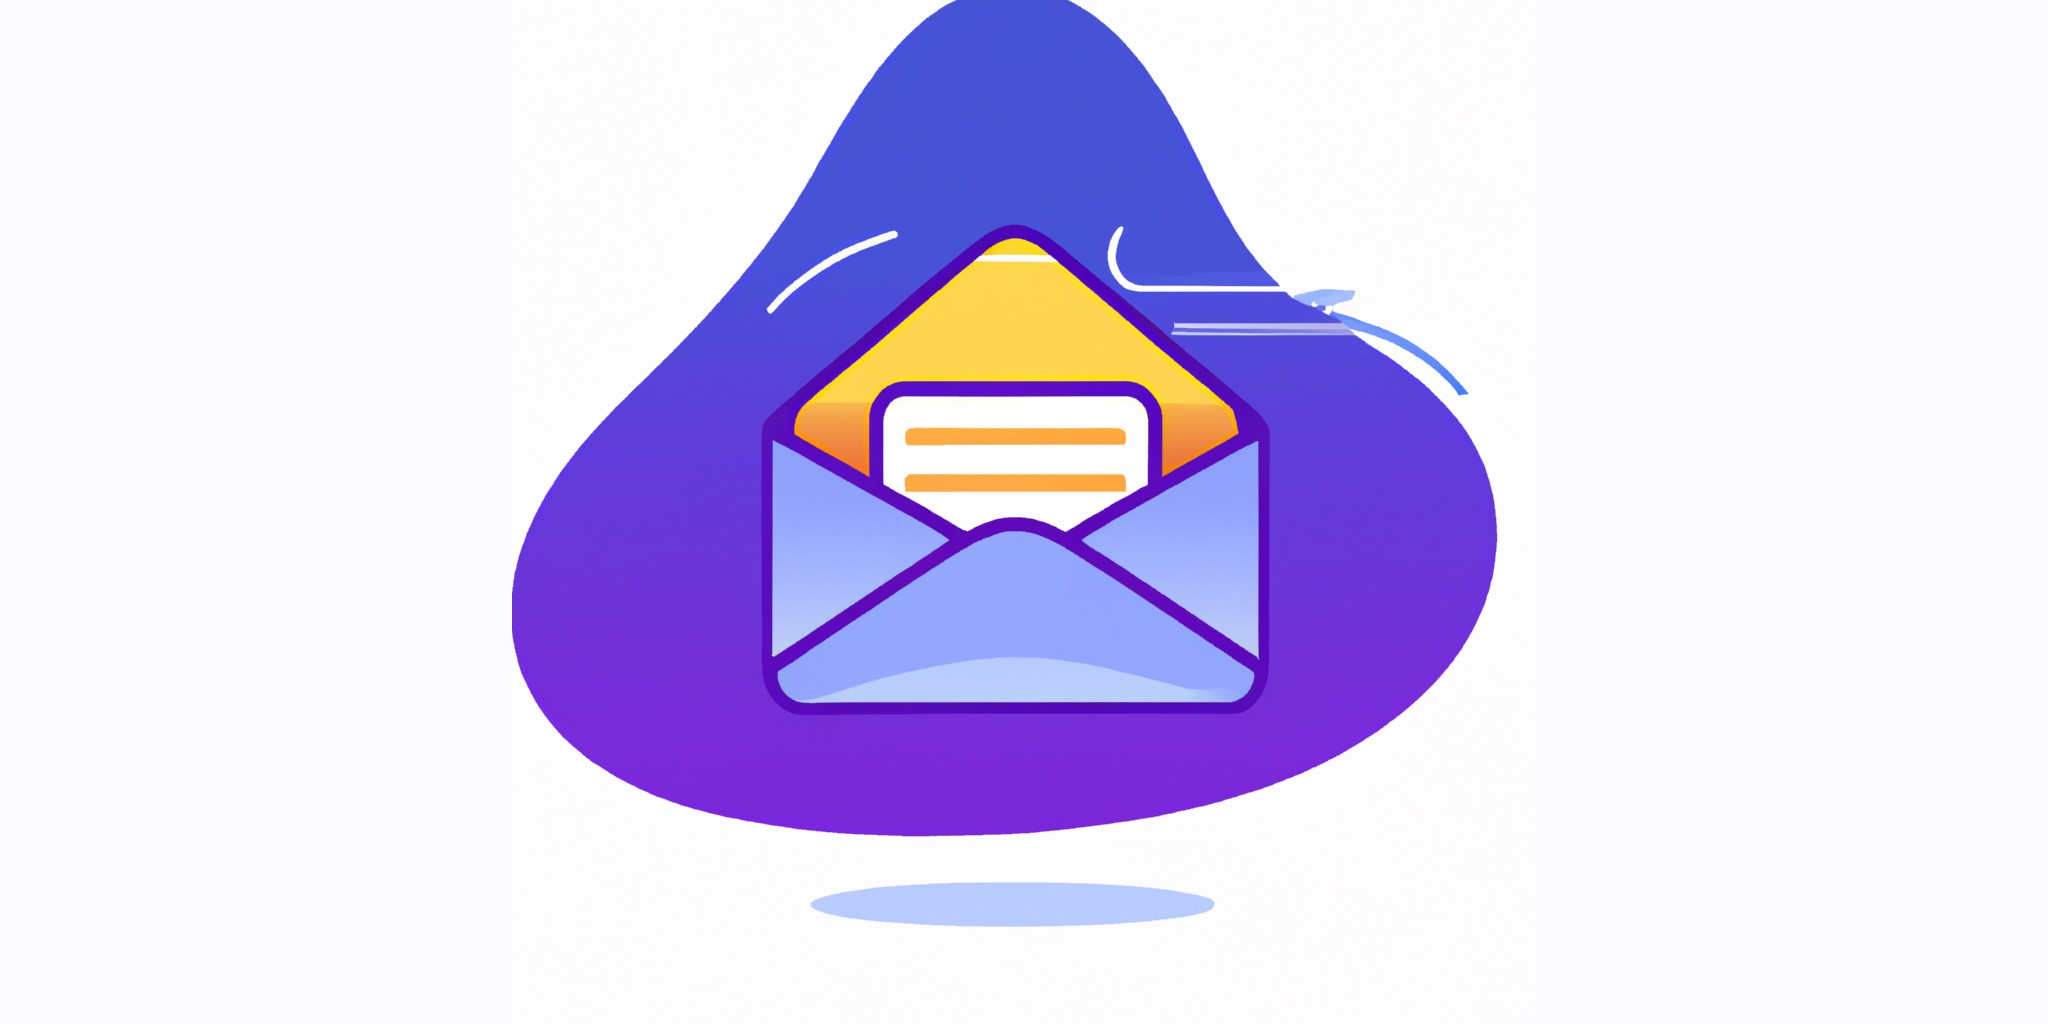 a envelope in flat illustration style with gradients and white background